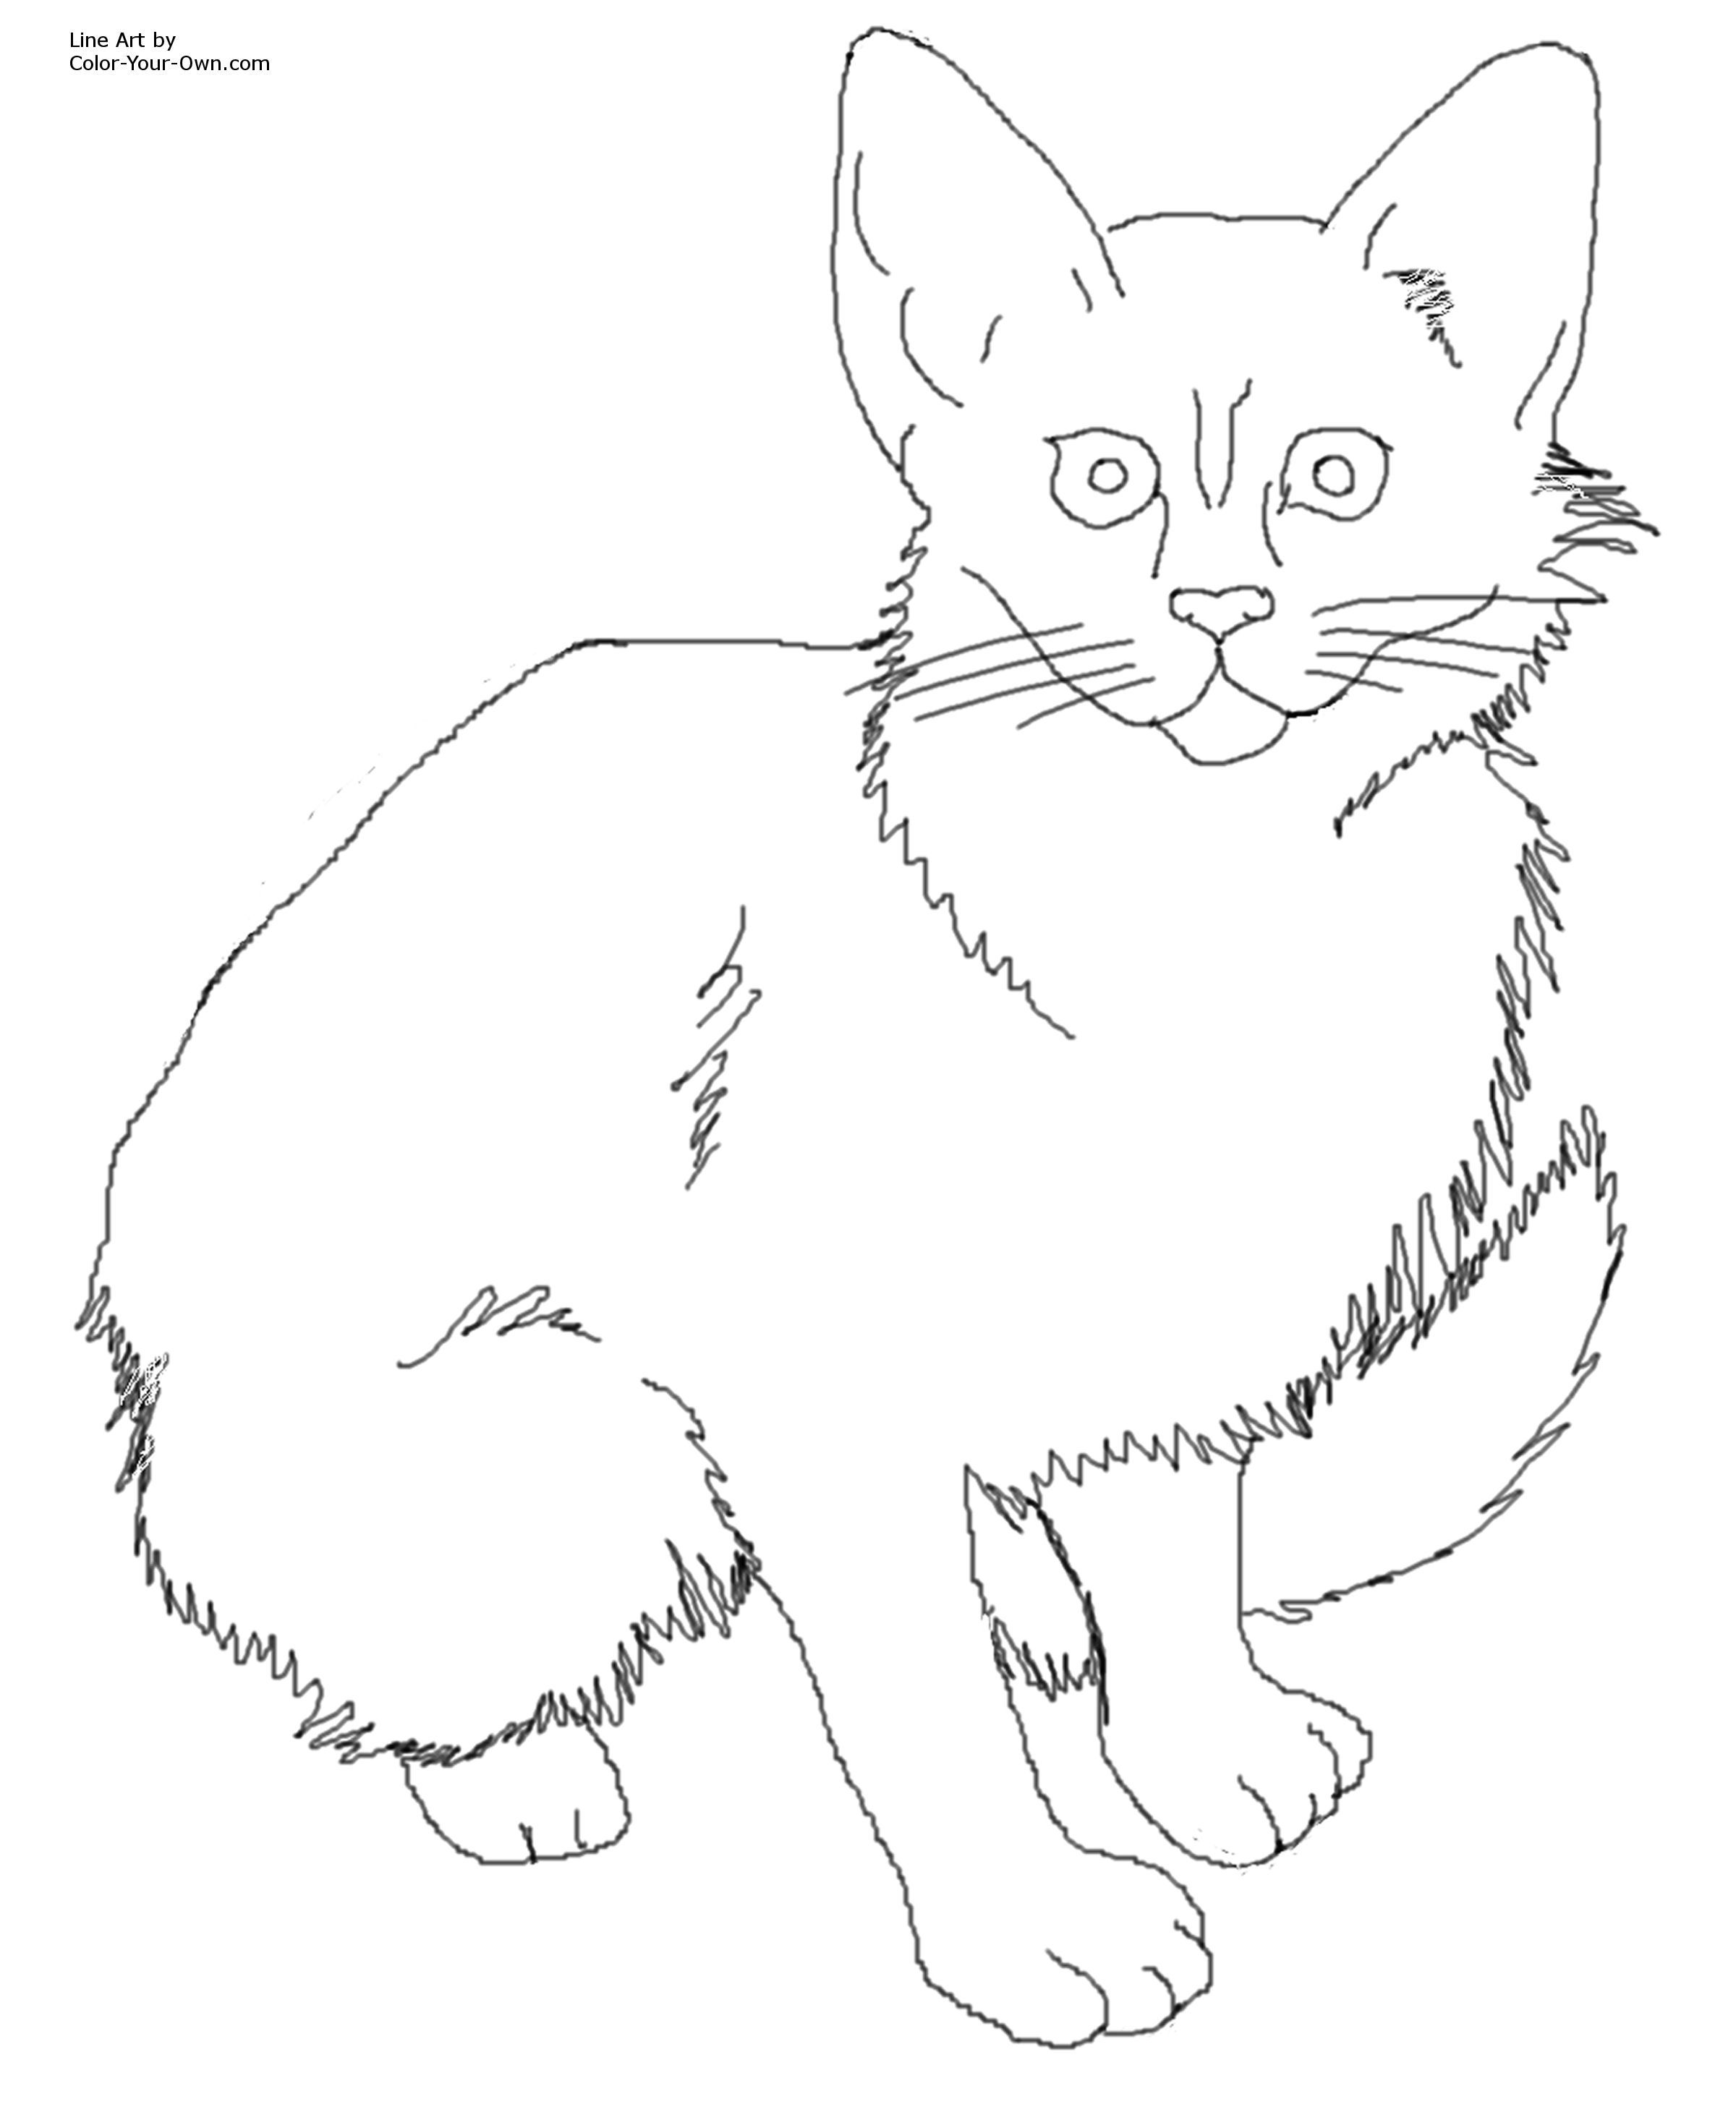 Cat And Kitten Coloring Pages - Coloring Home